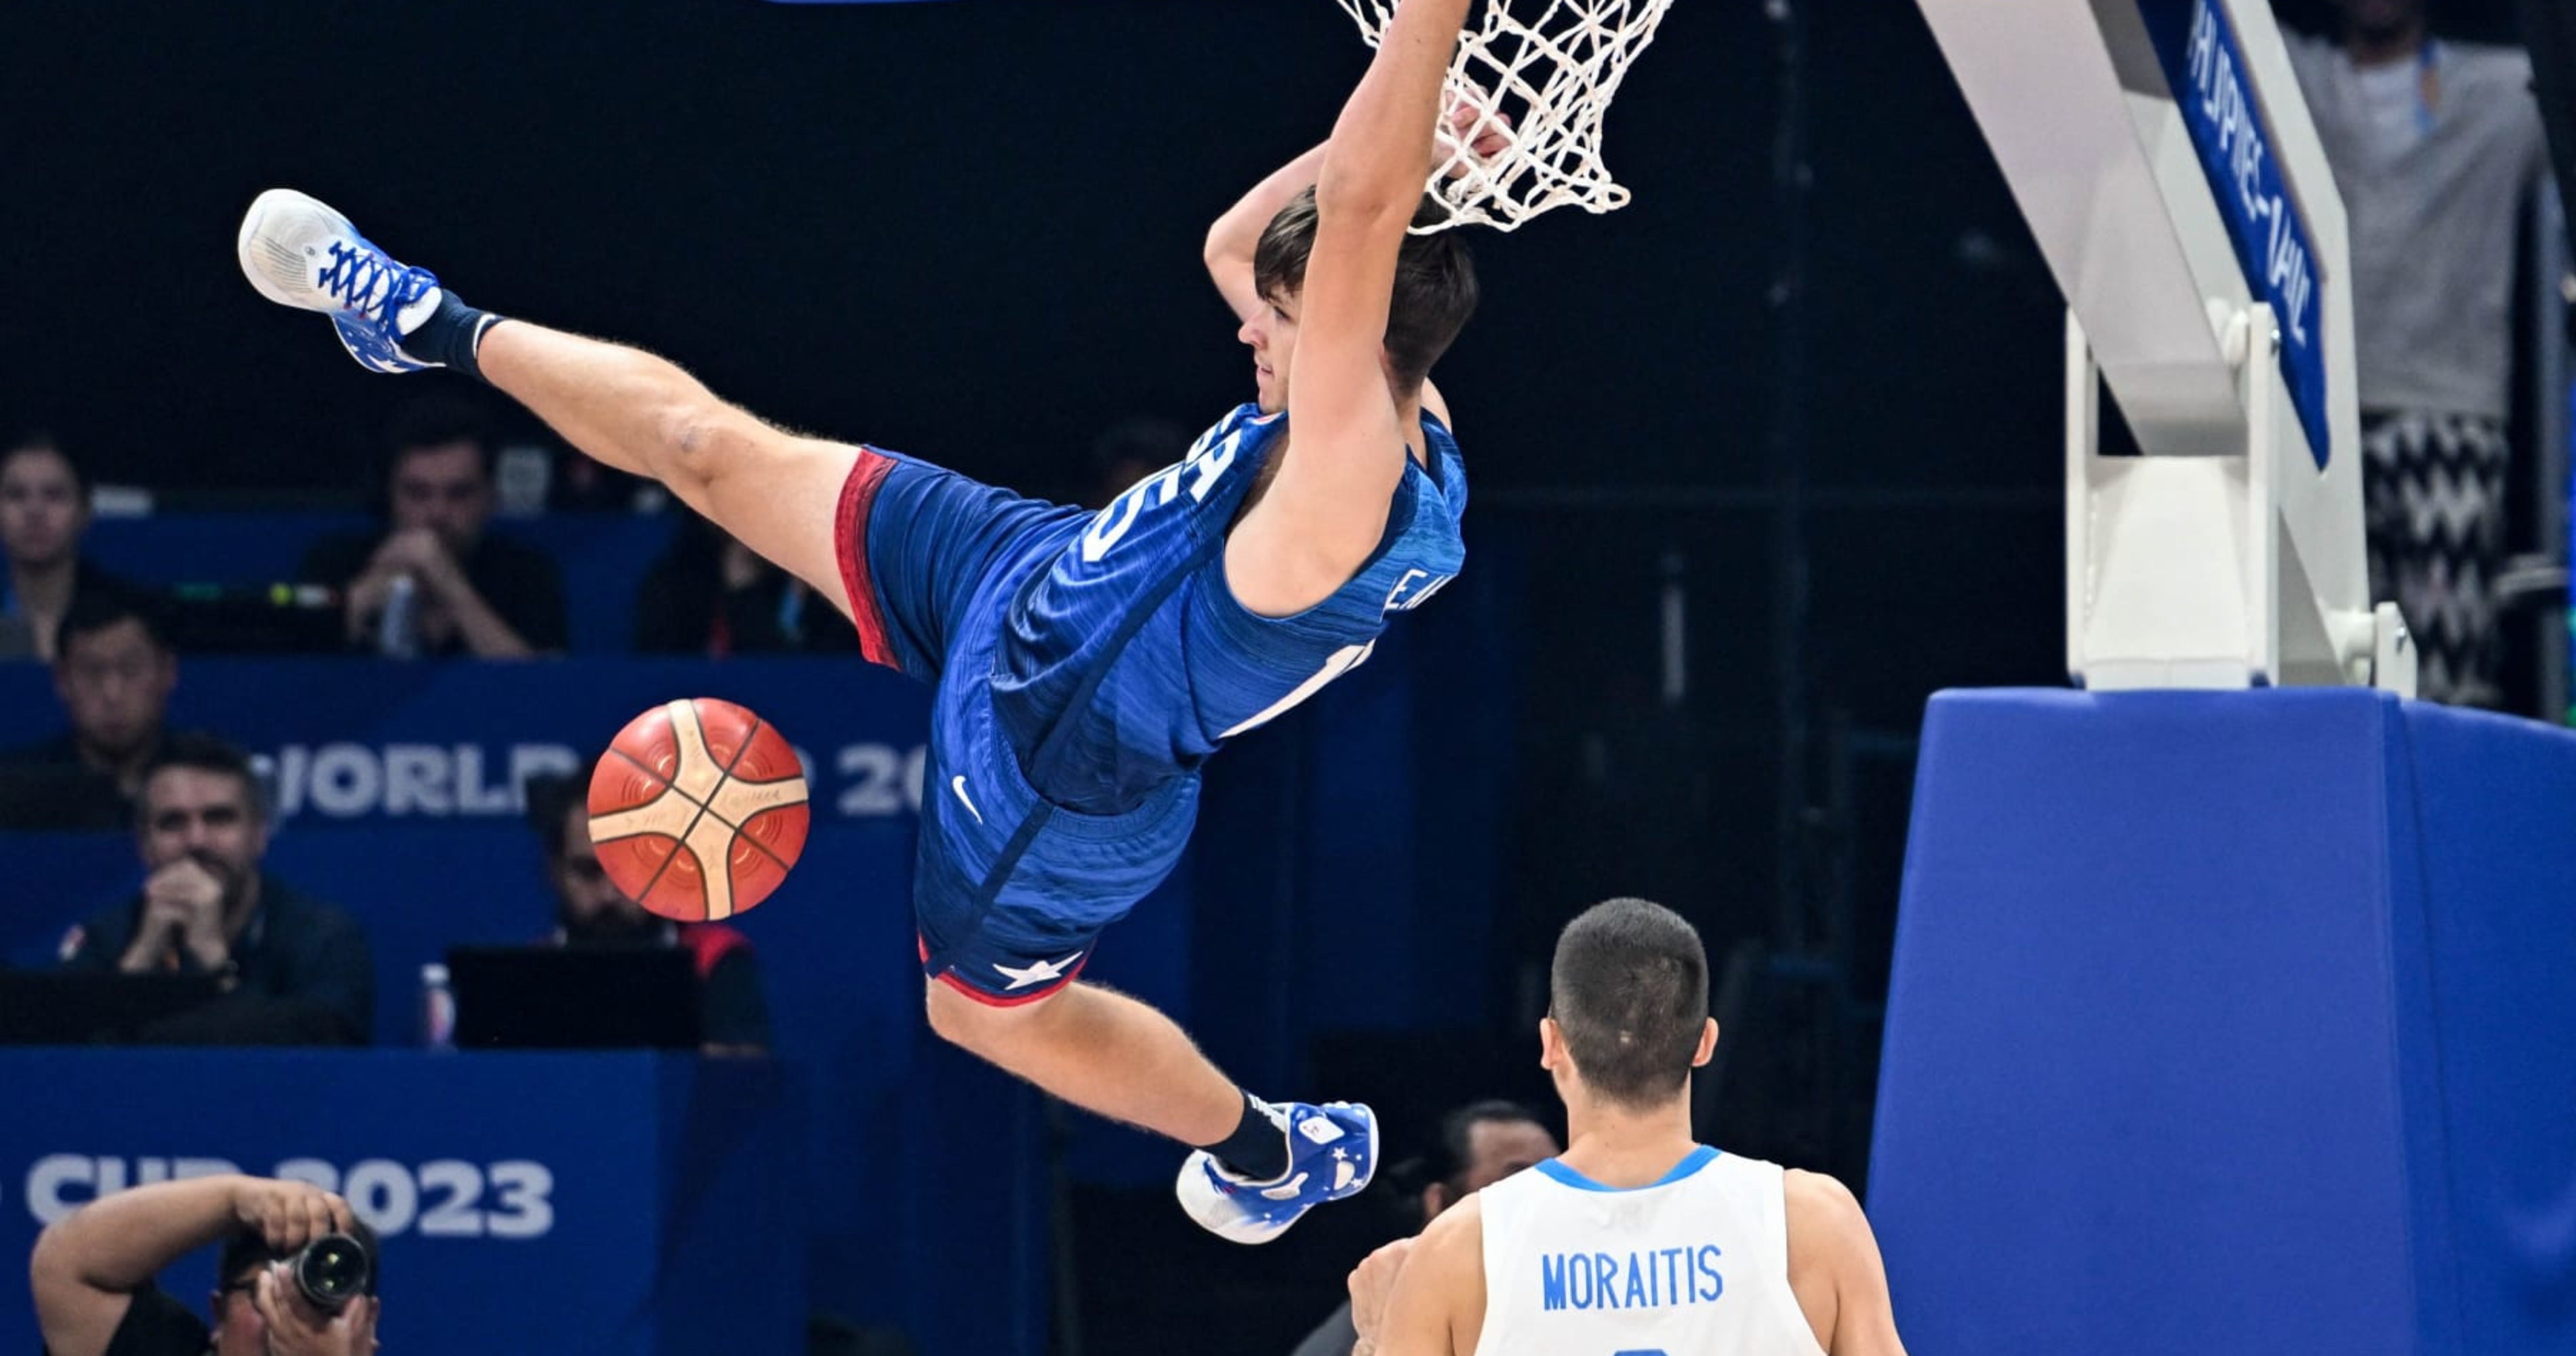 Find out when Austin Reaves will play in the FIBA World Cup with